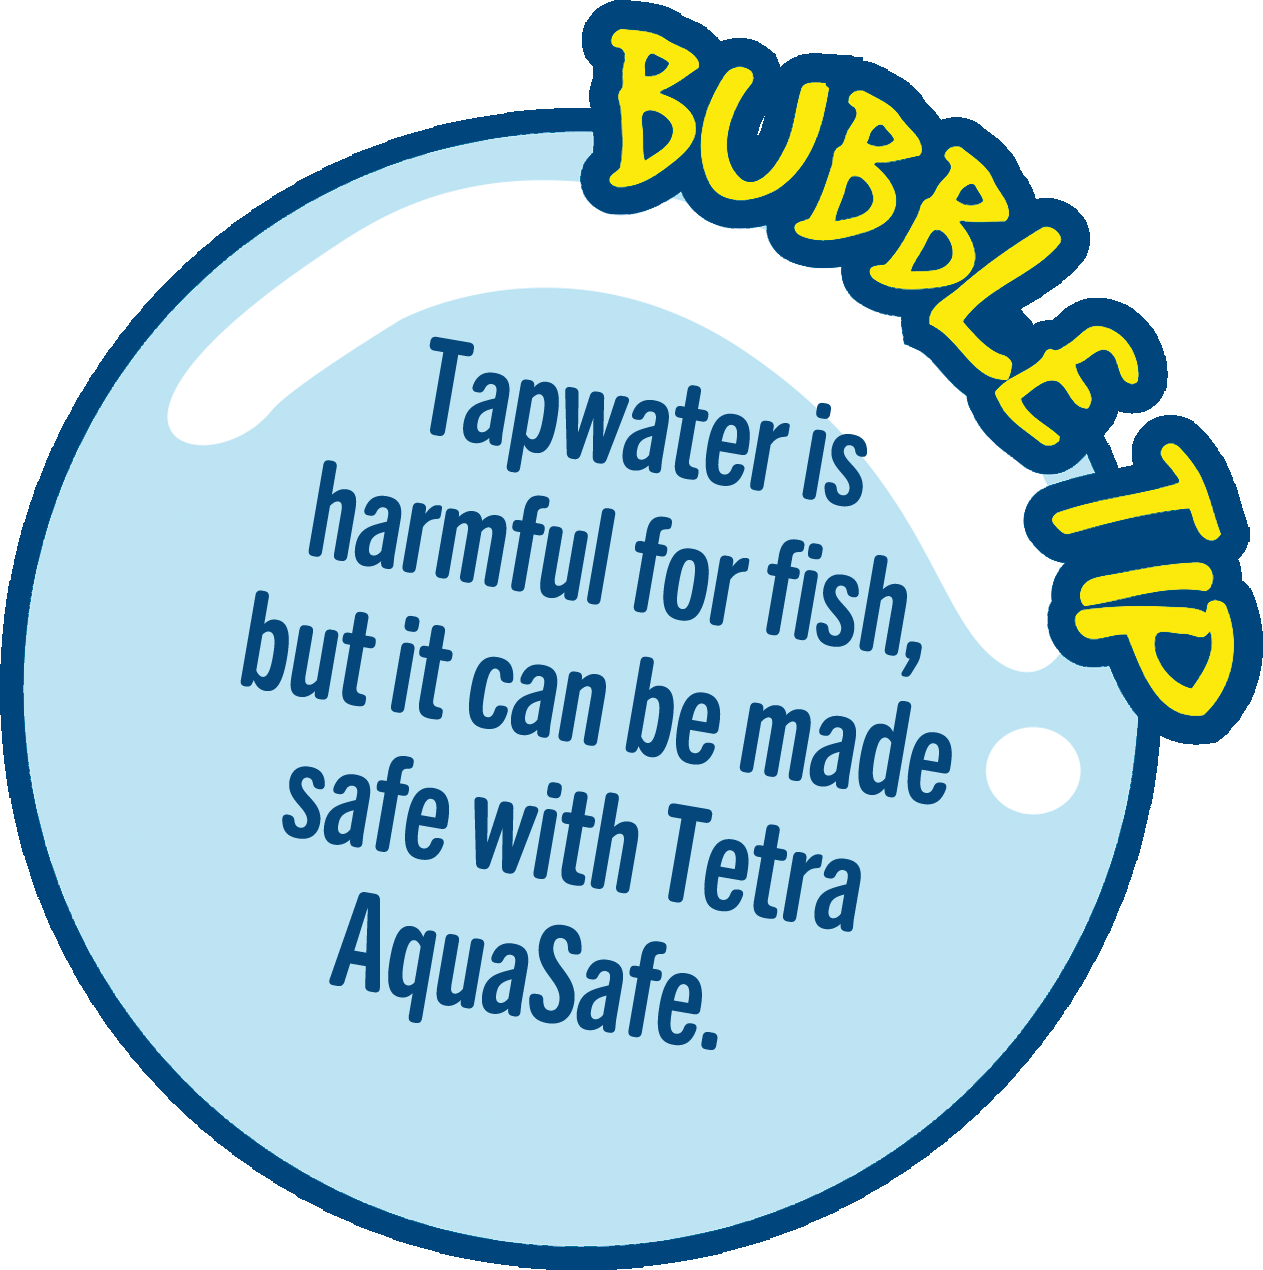 Tapwater can be harmful for fish, but it can be made safe with Tetra AquaSafe.